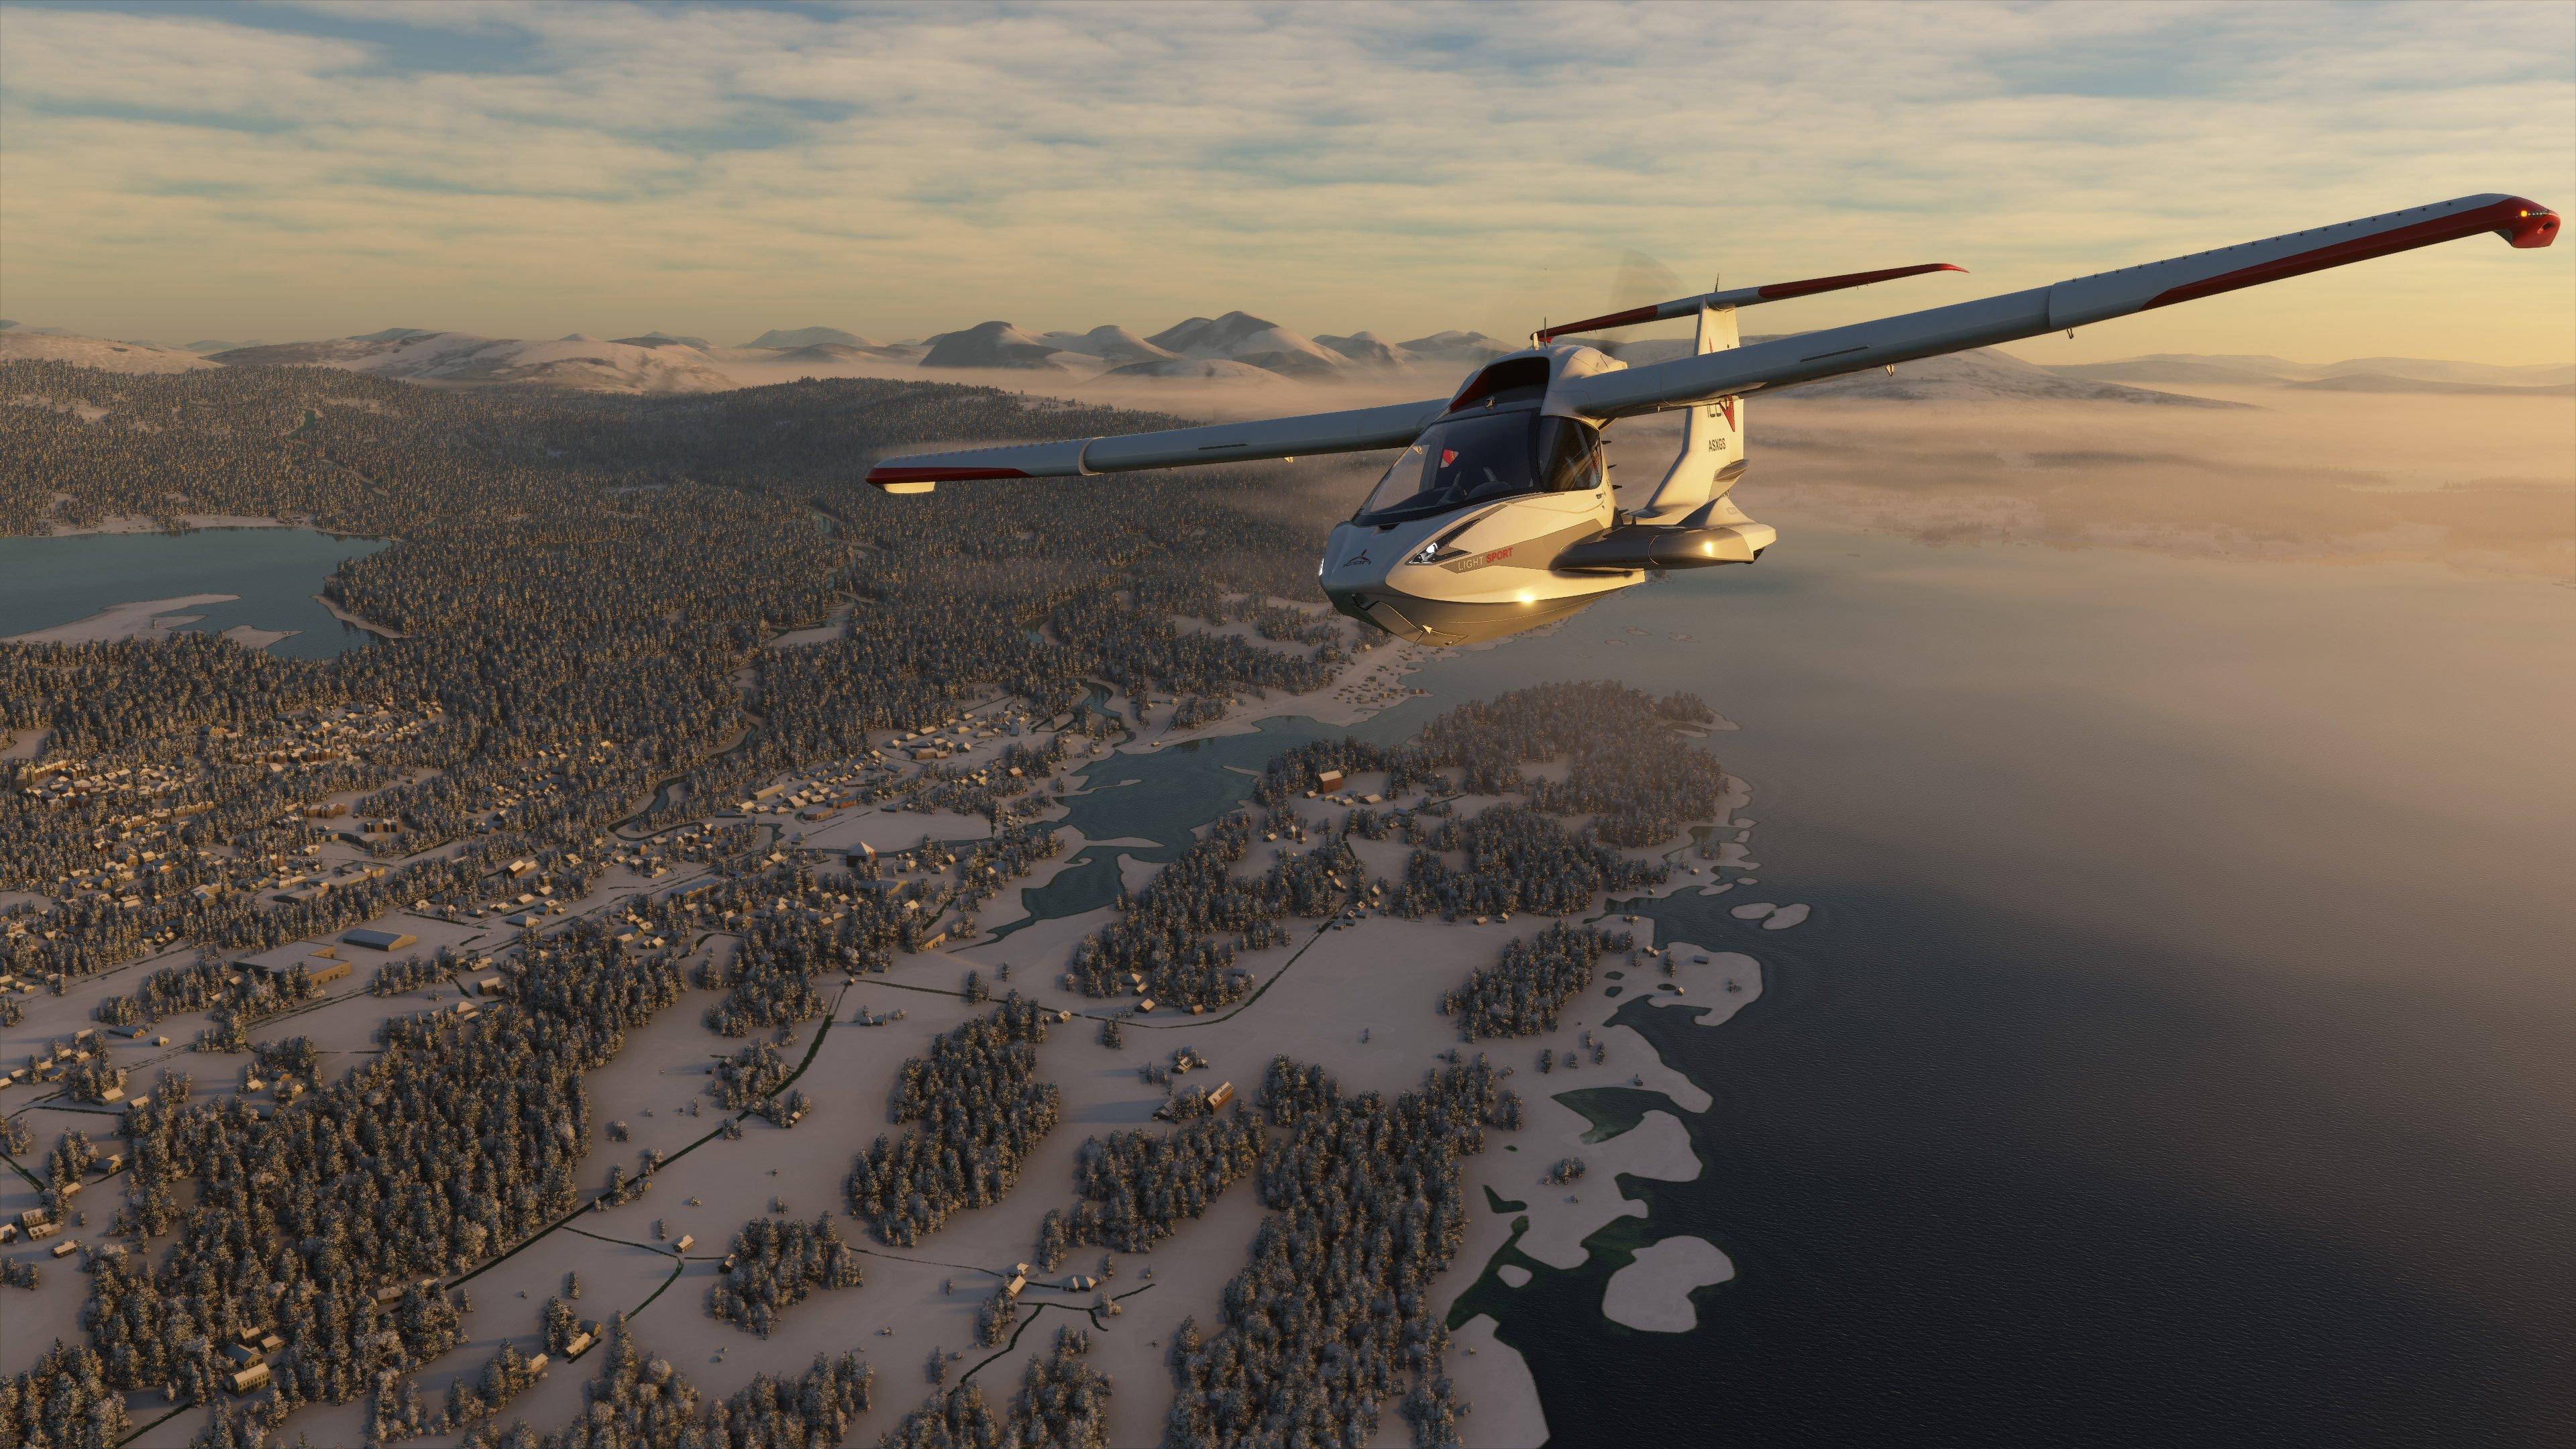 Microsoft Flight Simulator is a Fantastic Flying Experience on Xbox Series X